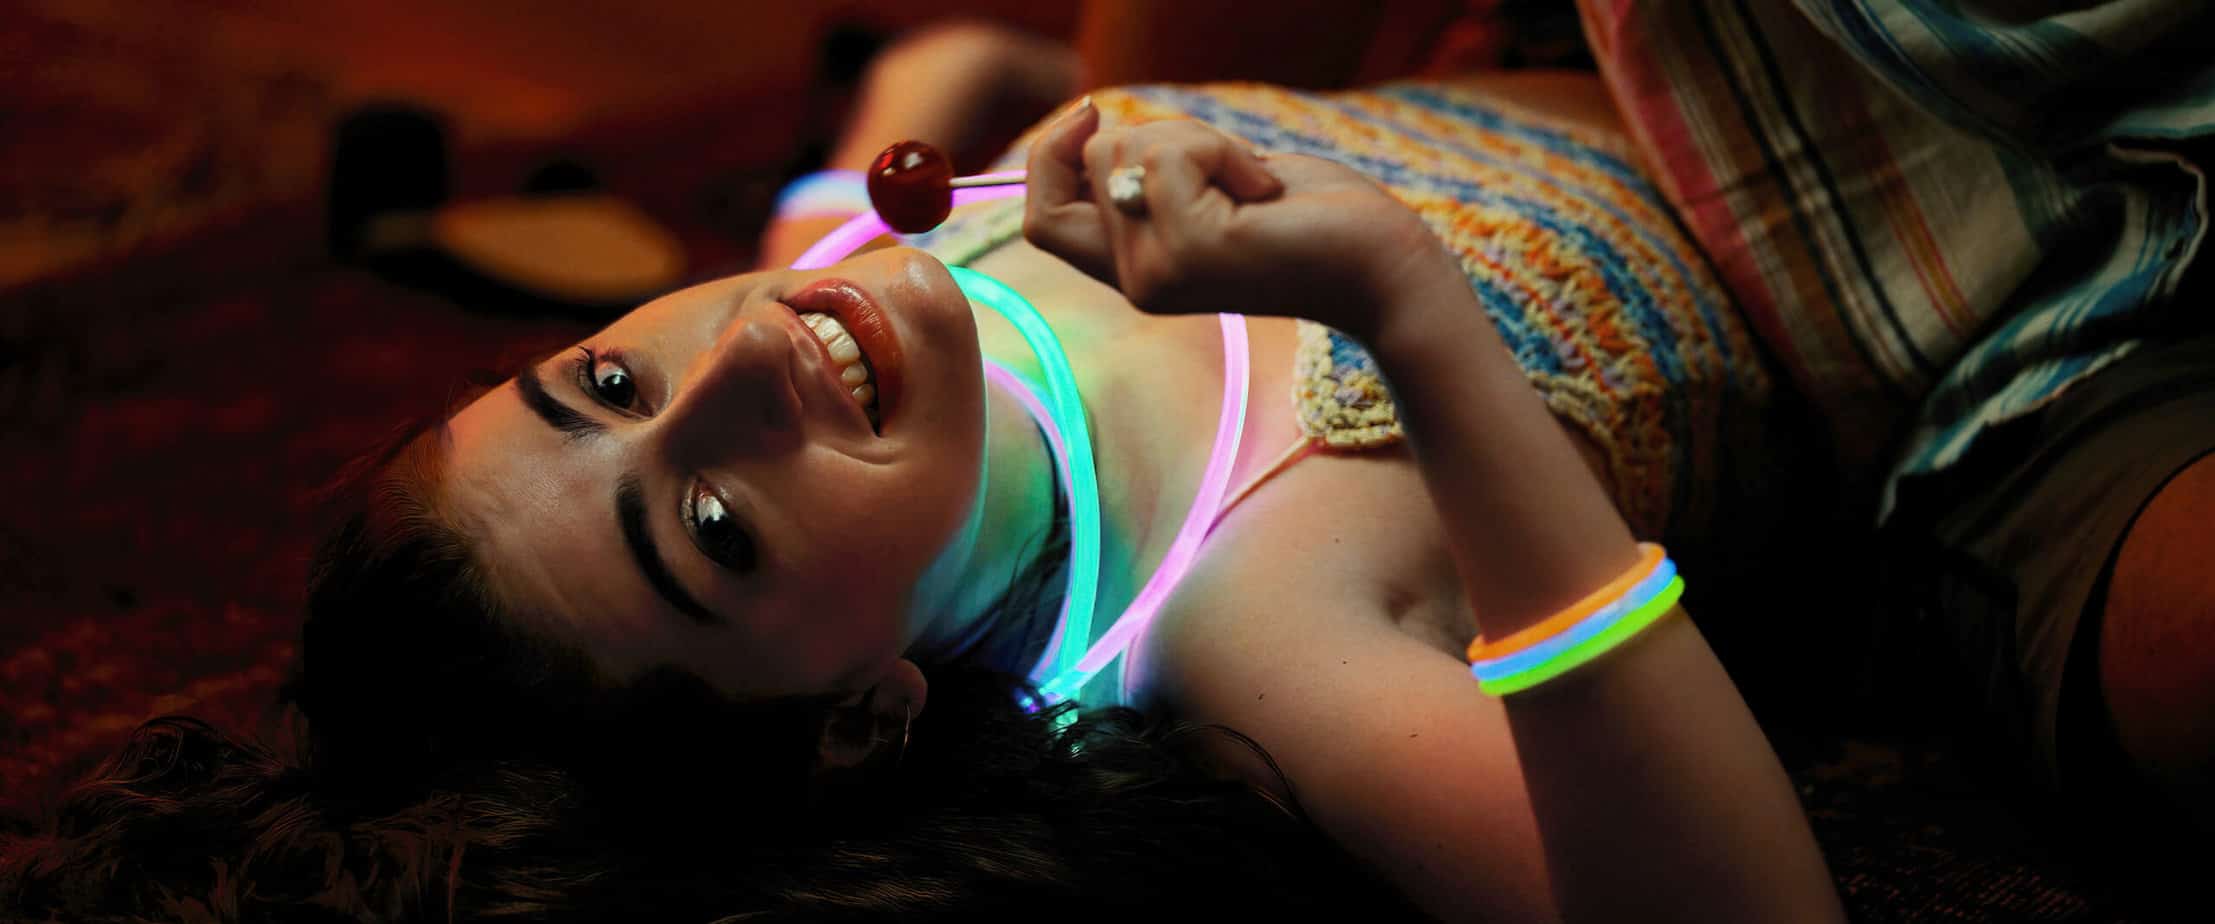 when can you pee during bodies bodies bodies.Girl laying on her back looking at the camera with glow necklaces around her neck.